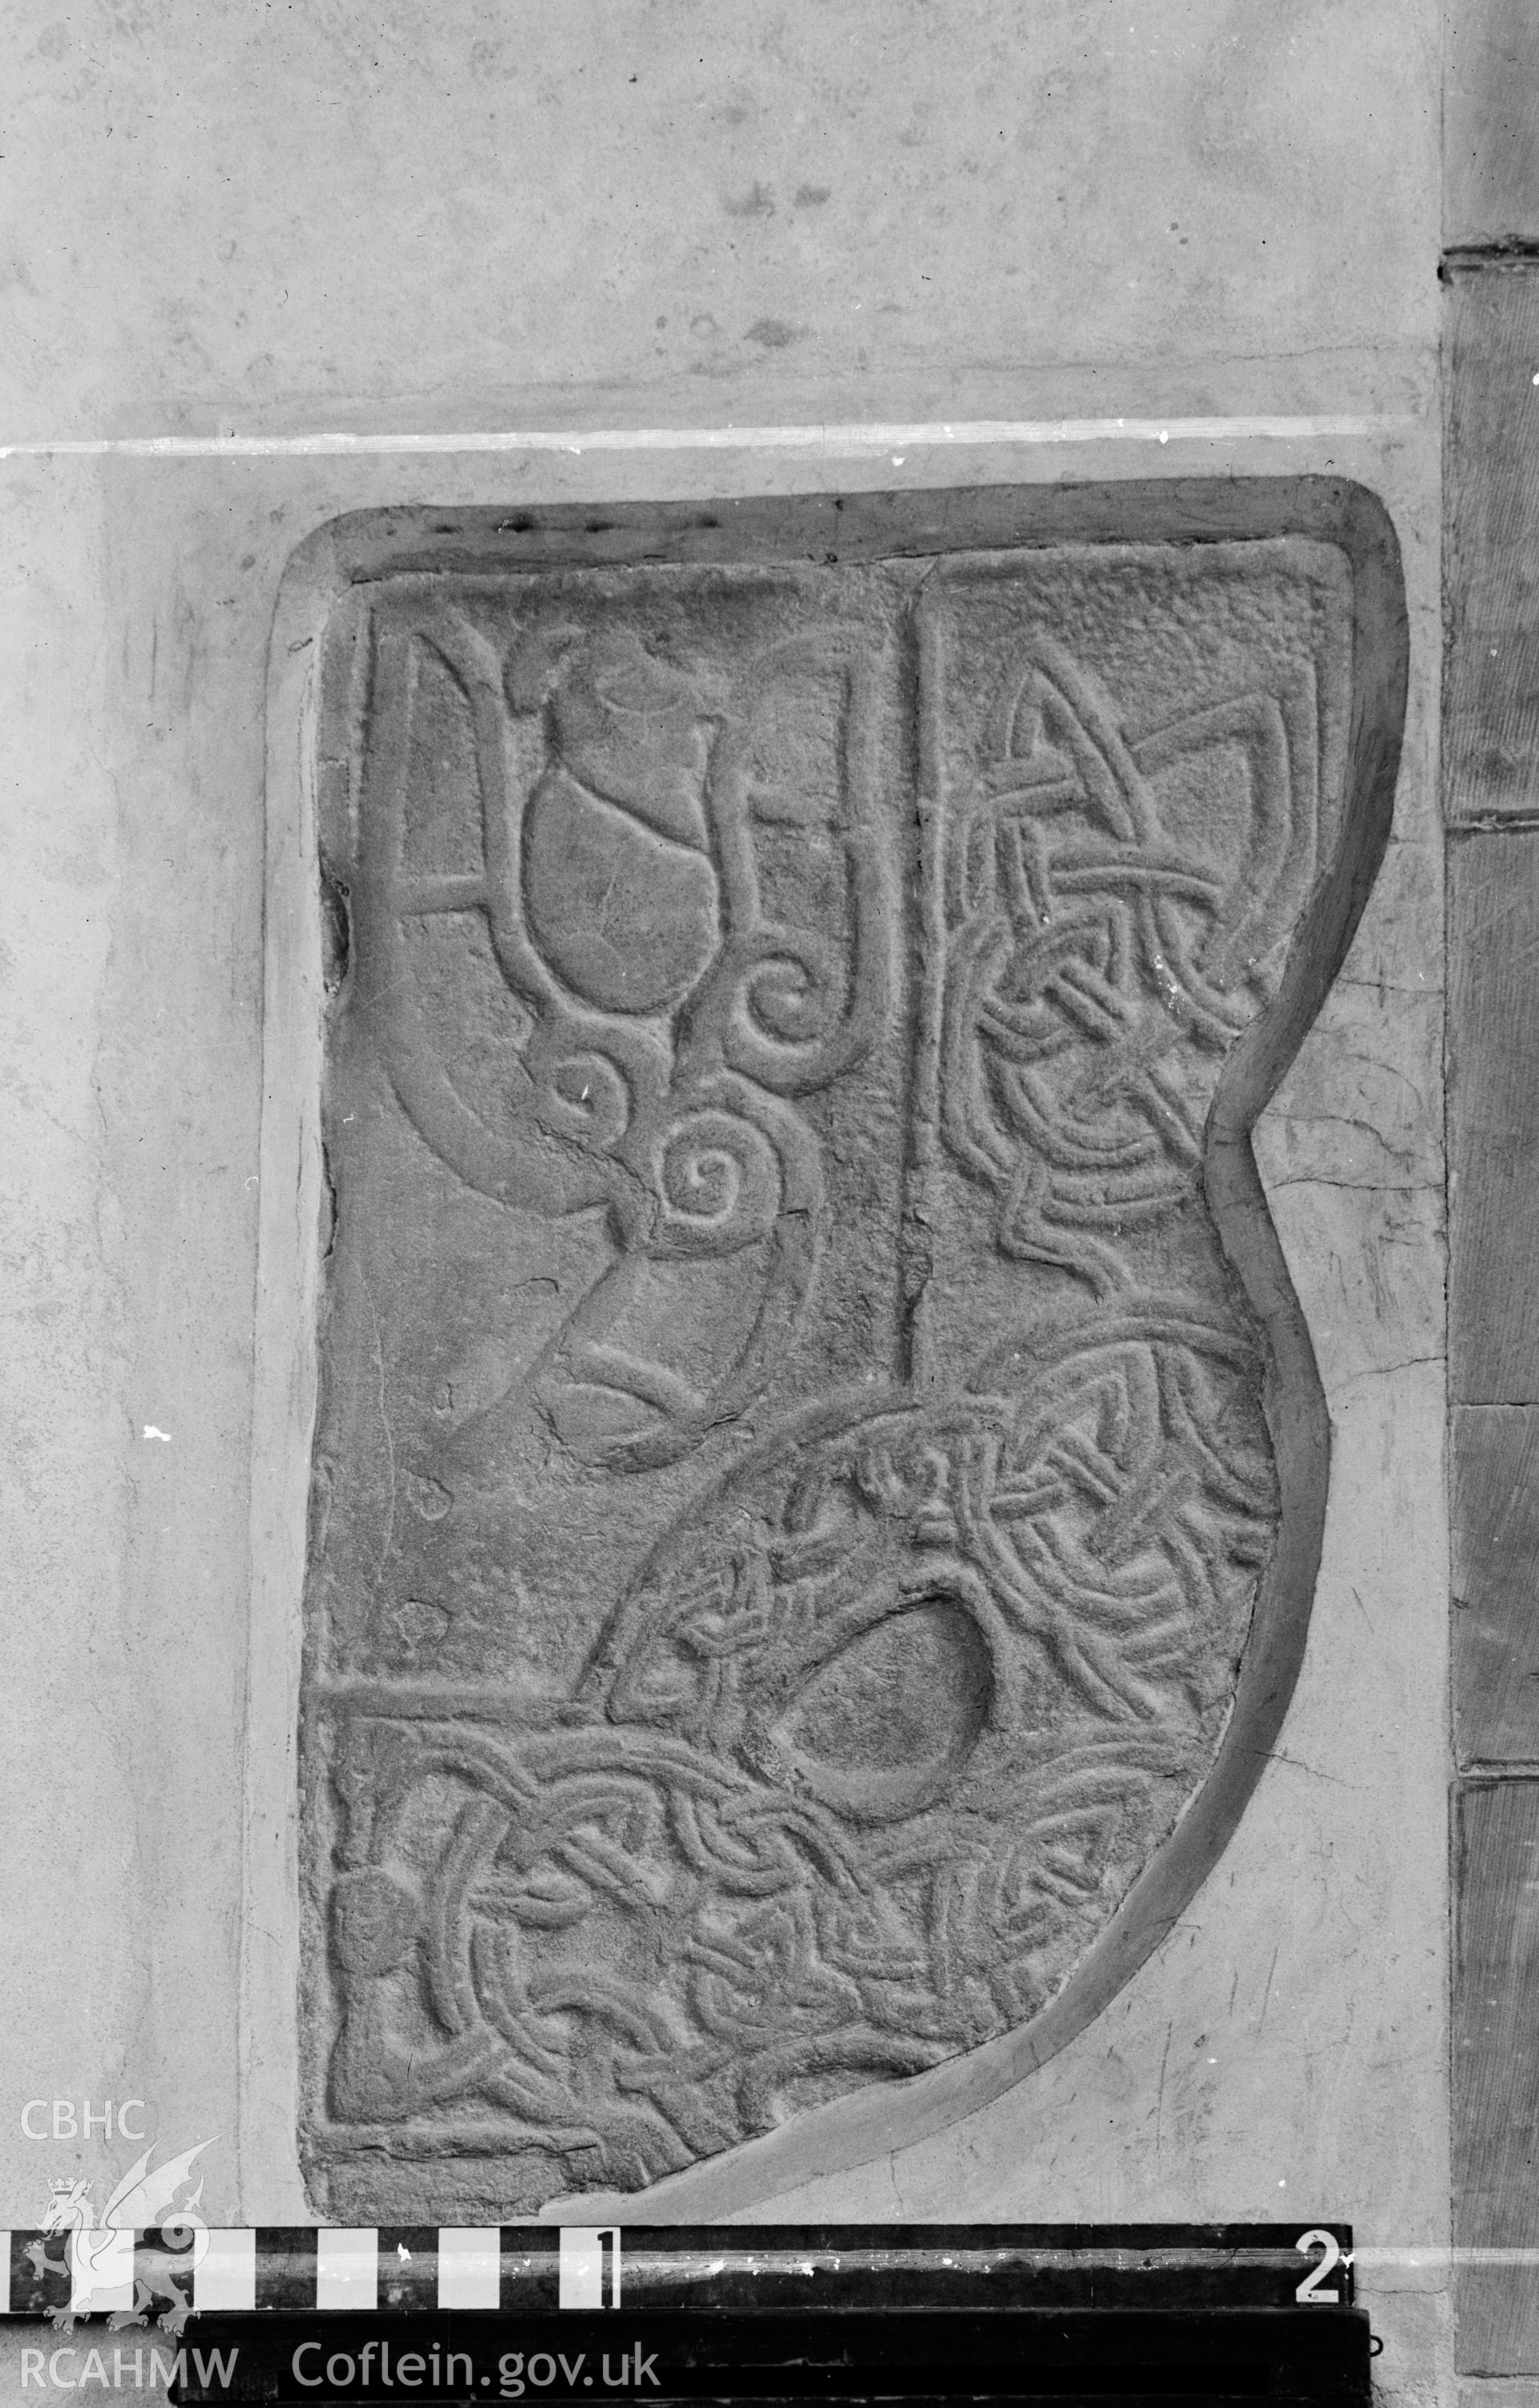 Digital copy of a black and white acetate negative showing detail of engraved stone wall insert at St. David's Cathedral, taken by E.W. Lovegrove, July 1936.